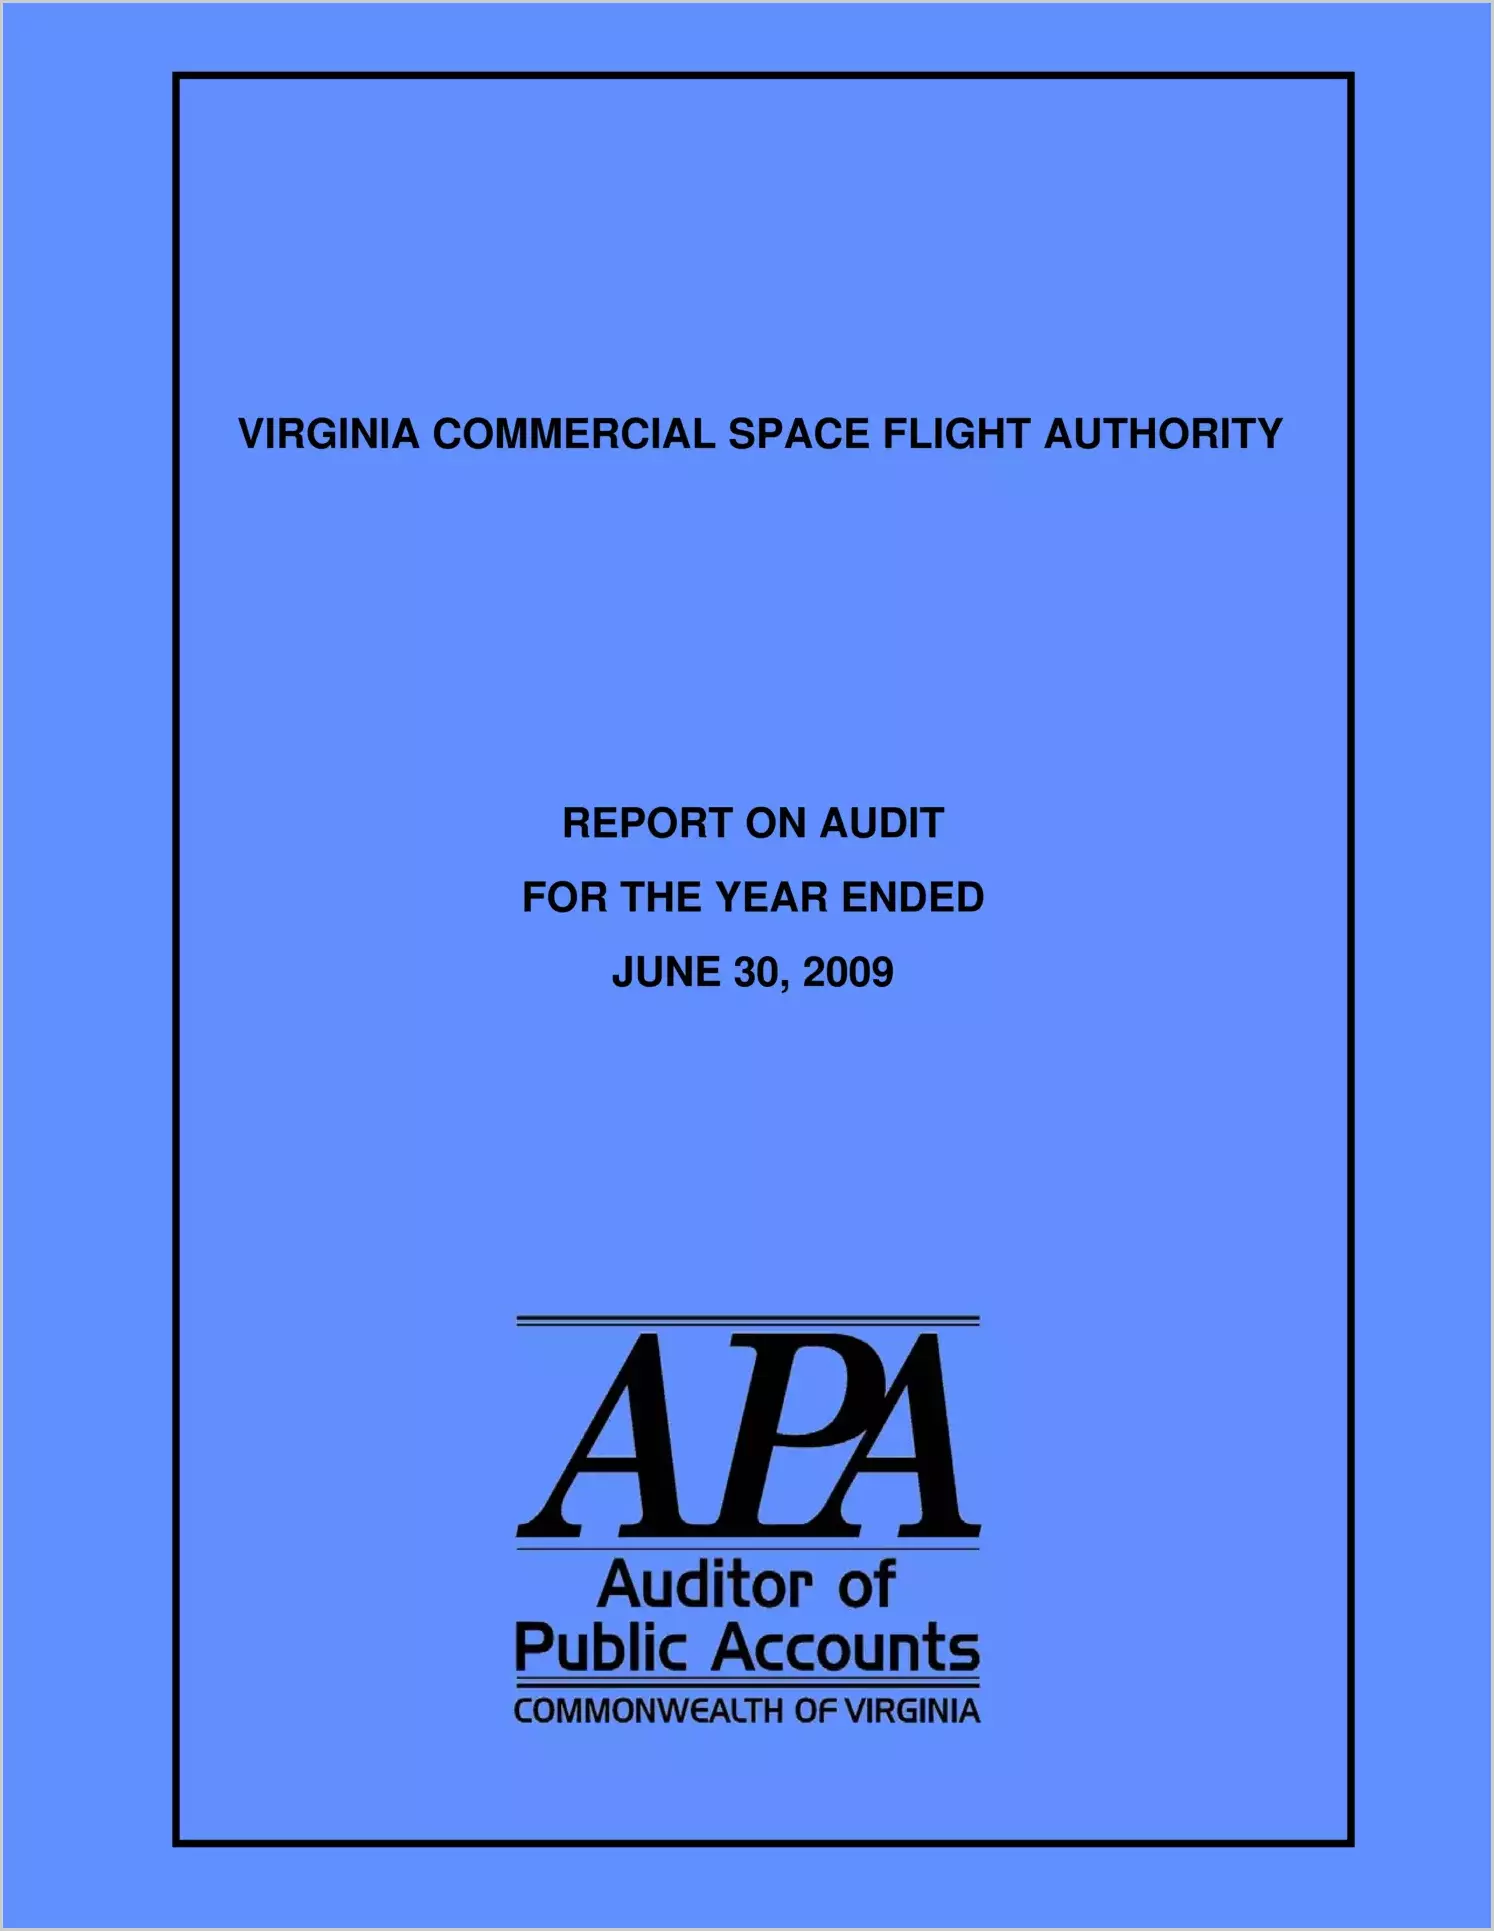 Virginia Commercial Space Flight Authority for the year ended June 30, 2009